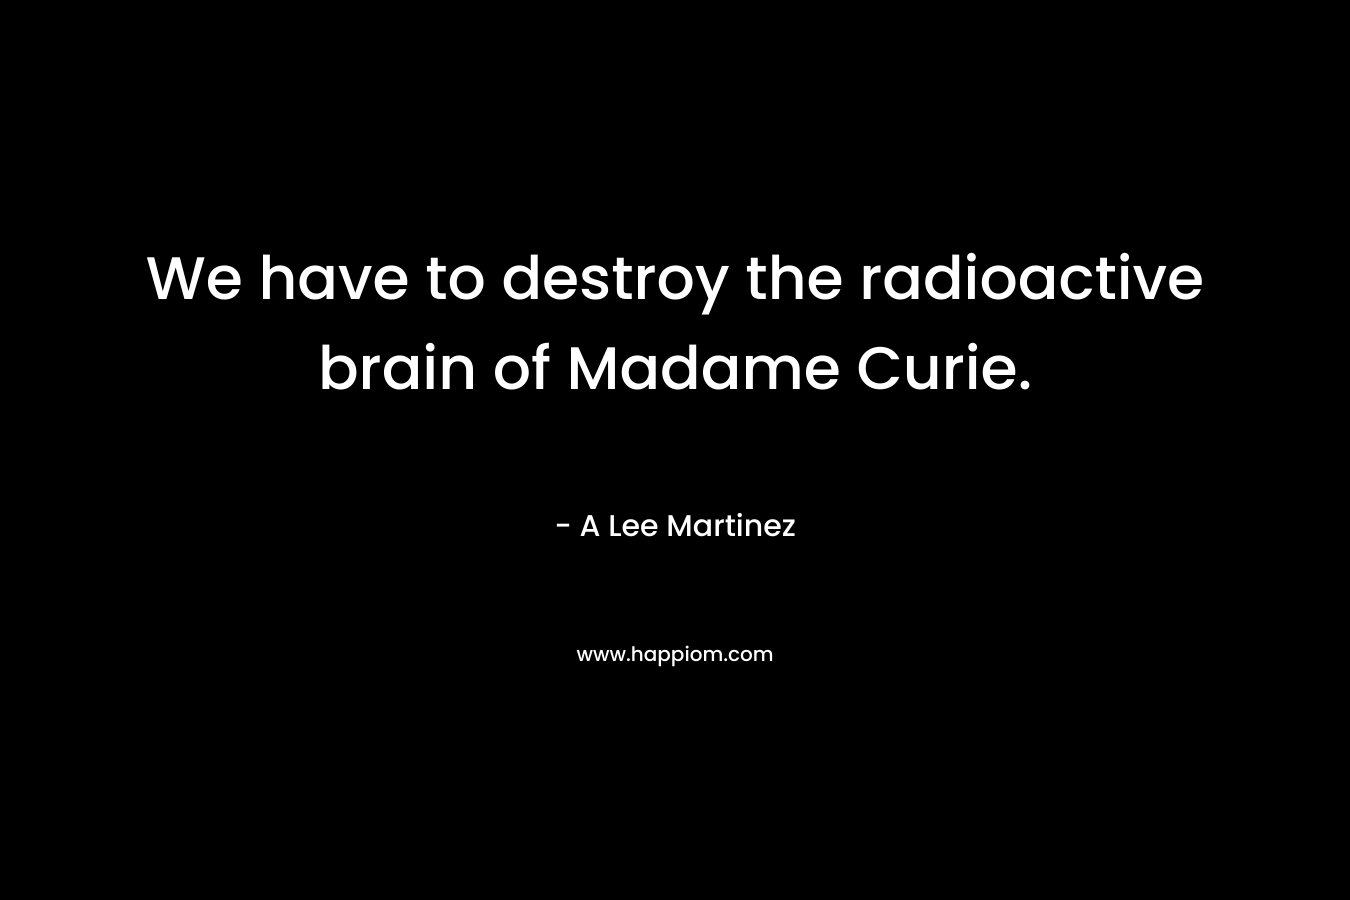 We have to destroy the radioactive brain of Madame Curie. – A Lee Martinez